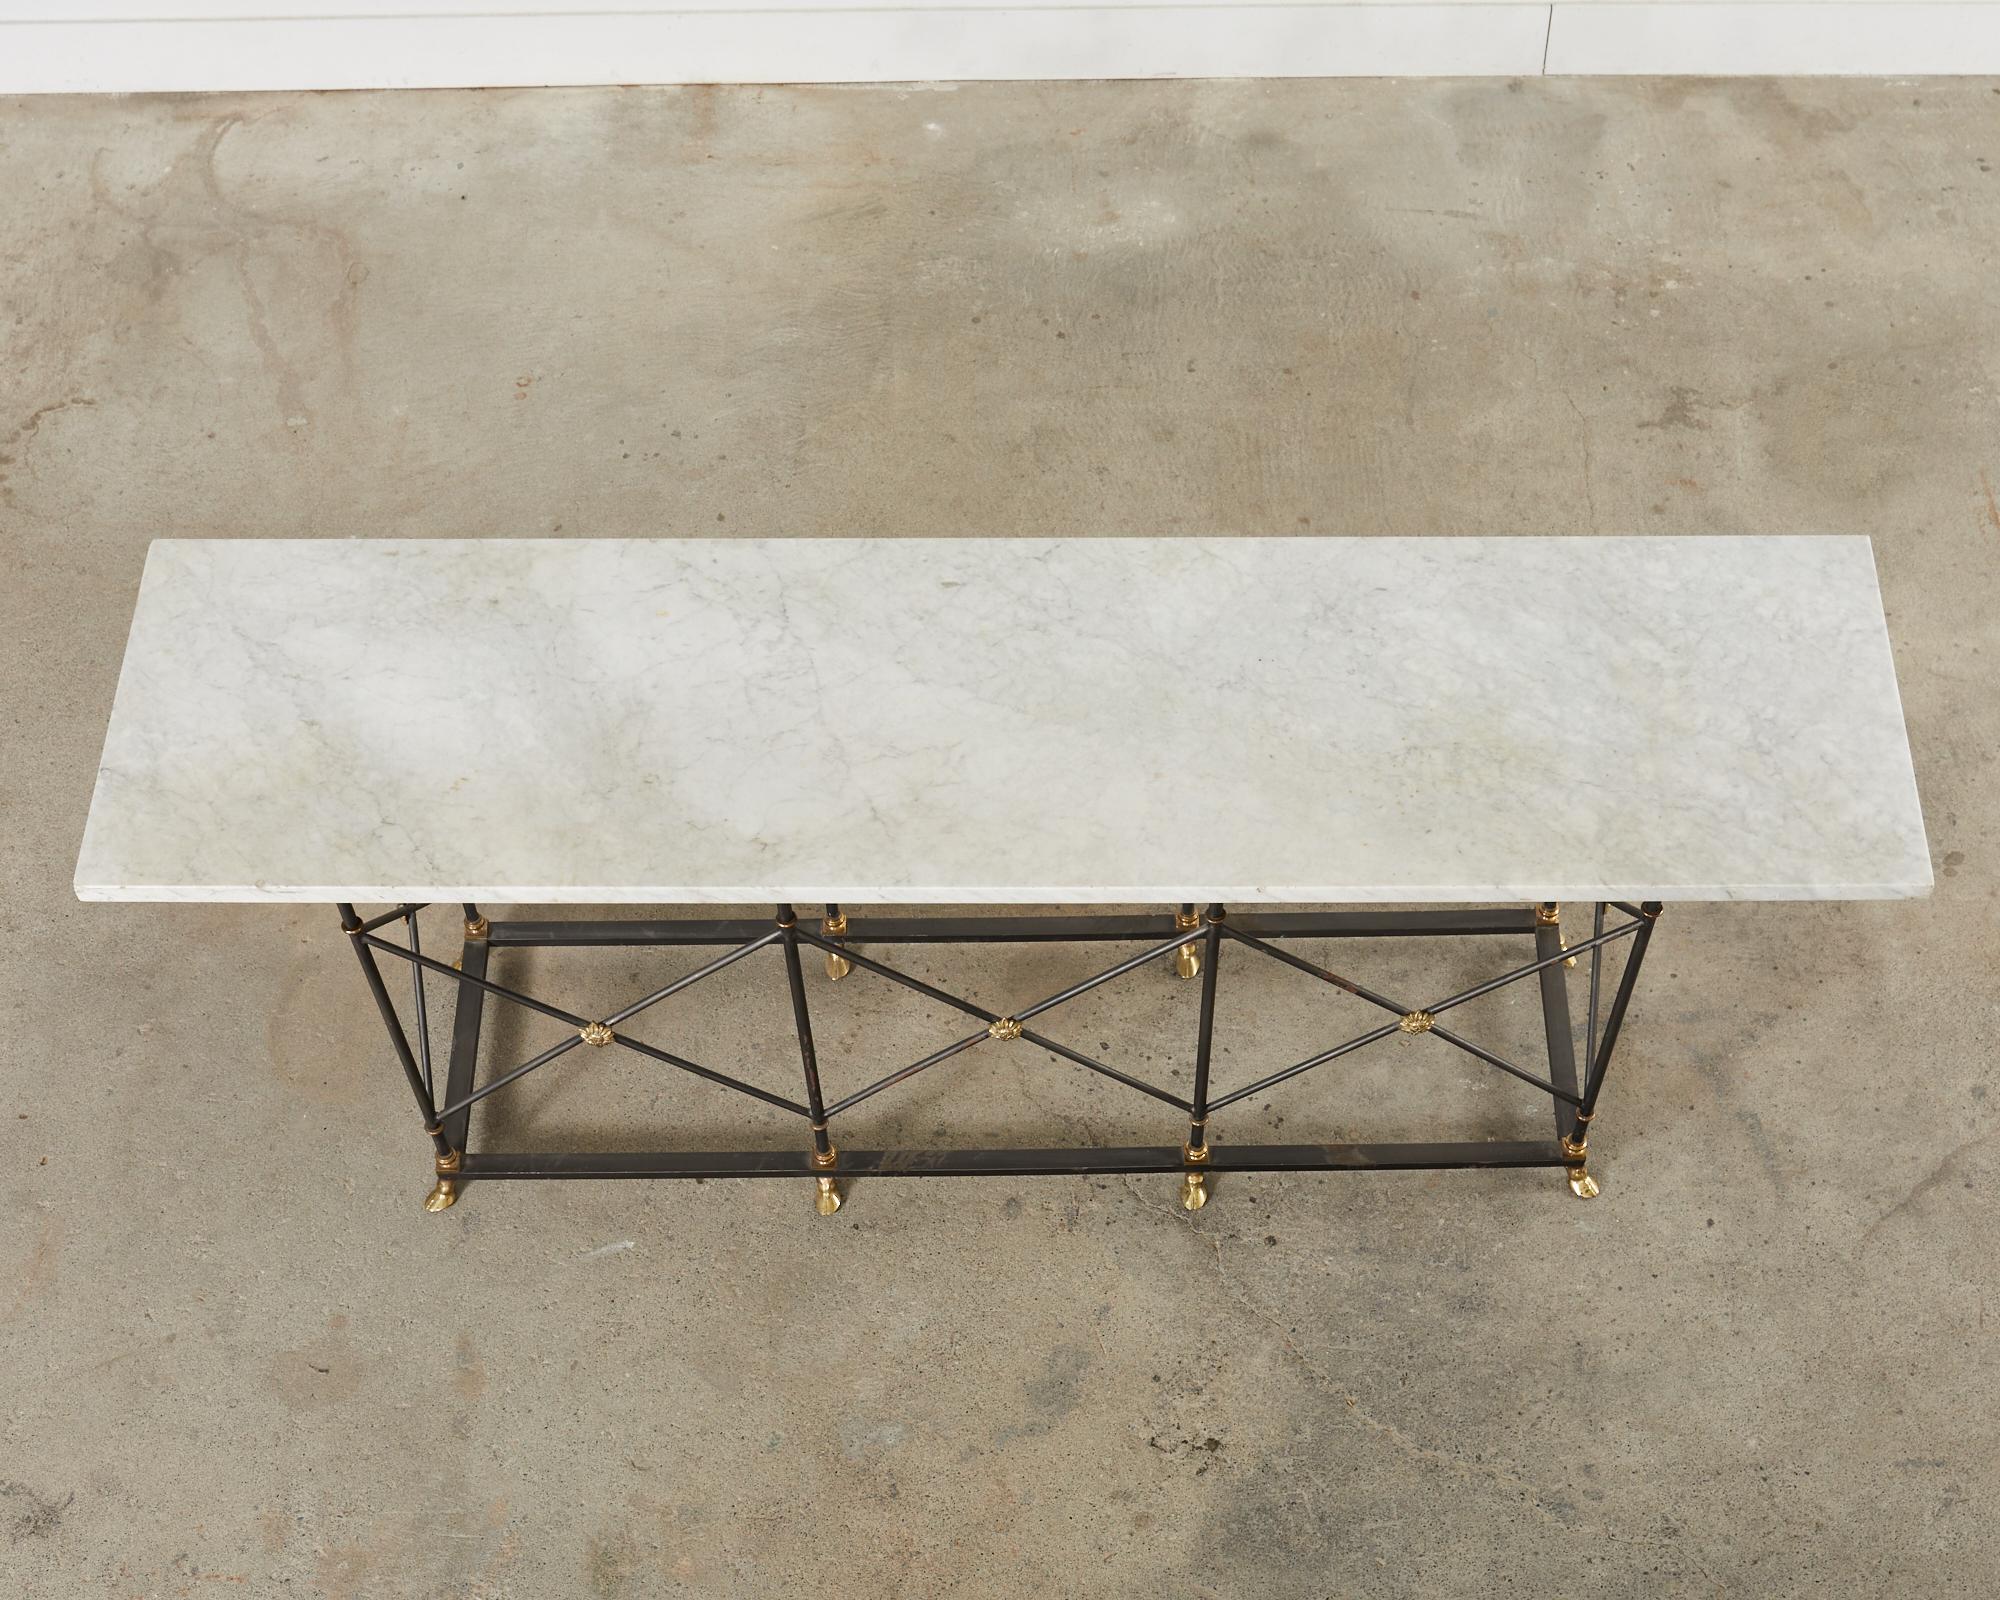 Patinated Neoclassical Style Iron Bronze Carrara Marble Top Console Table 